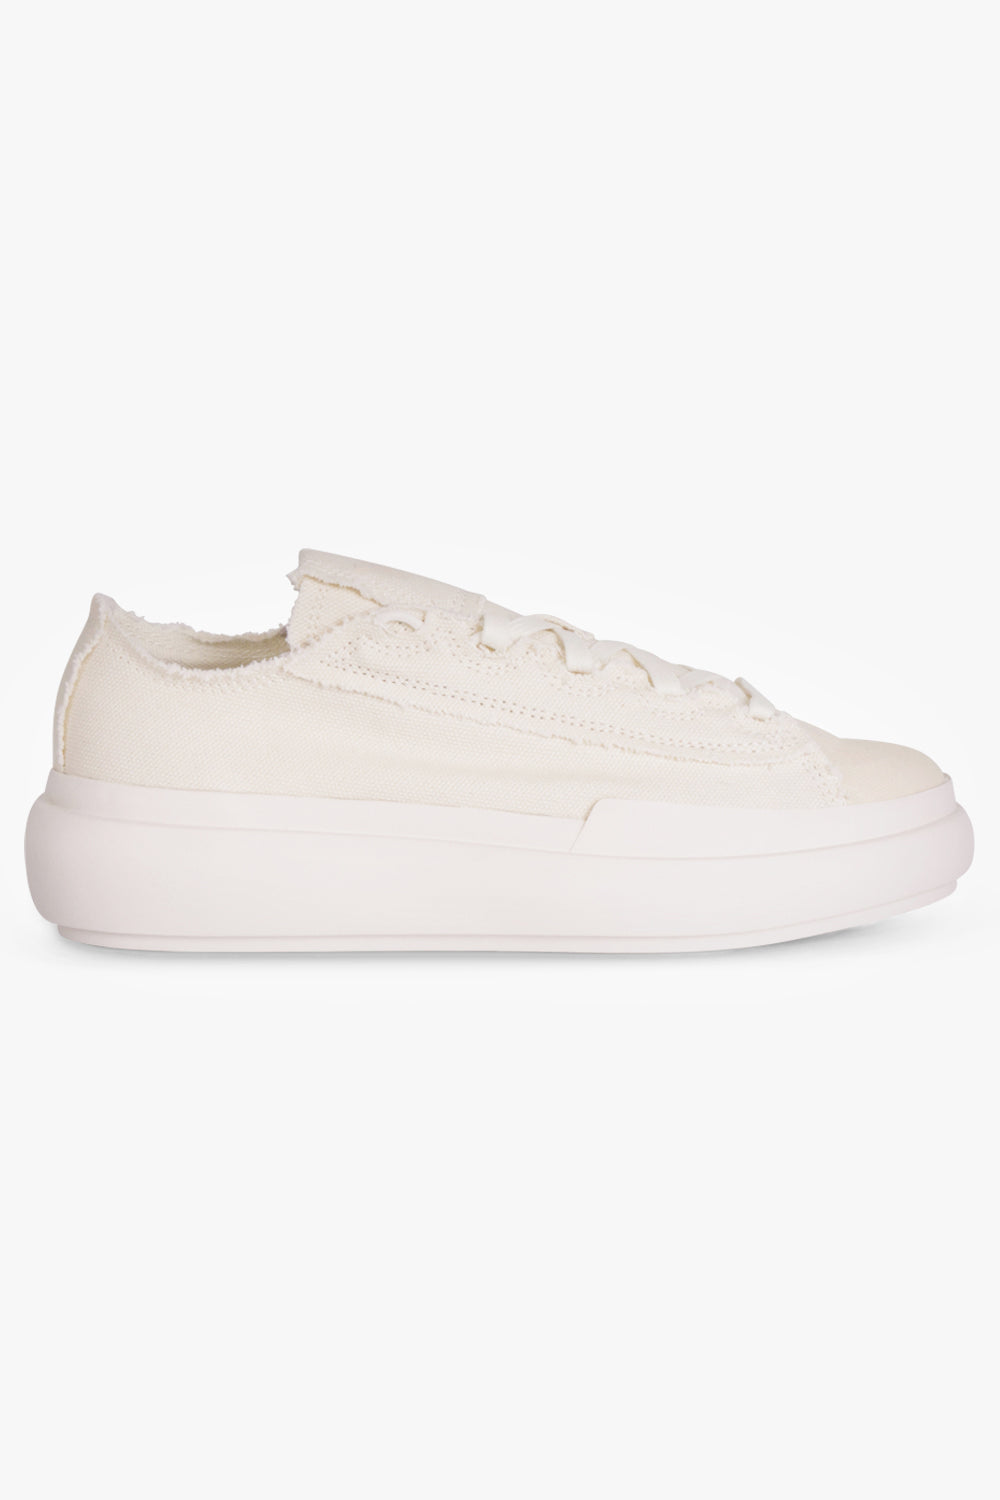 Y-3 SHOES Nizza Low Leather Sneaker | Off White